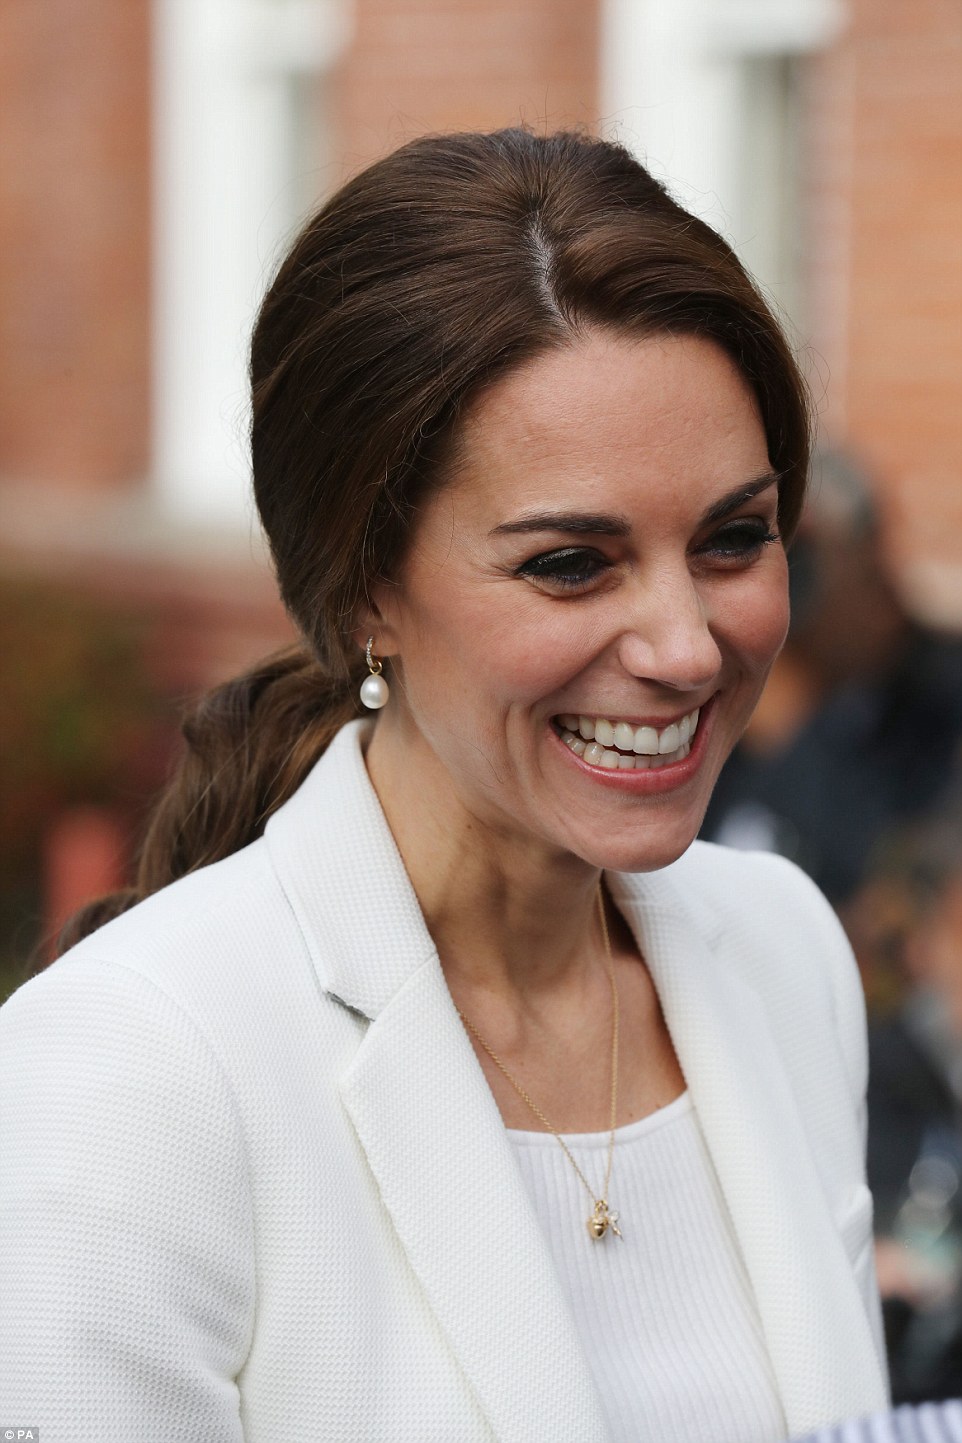 The Duchess beamed as she arrived in Victoria, Canada, looking as chic as ever in a crisp white outfit and minimalist jewellery